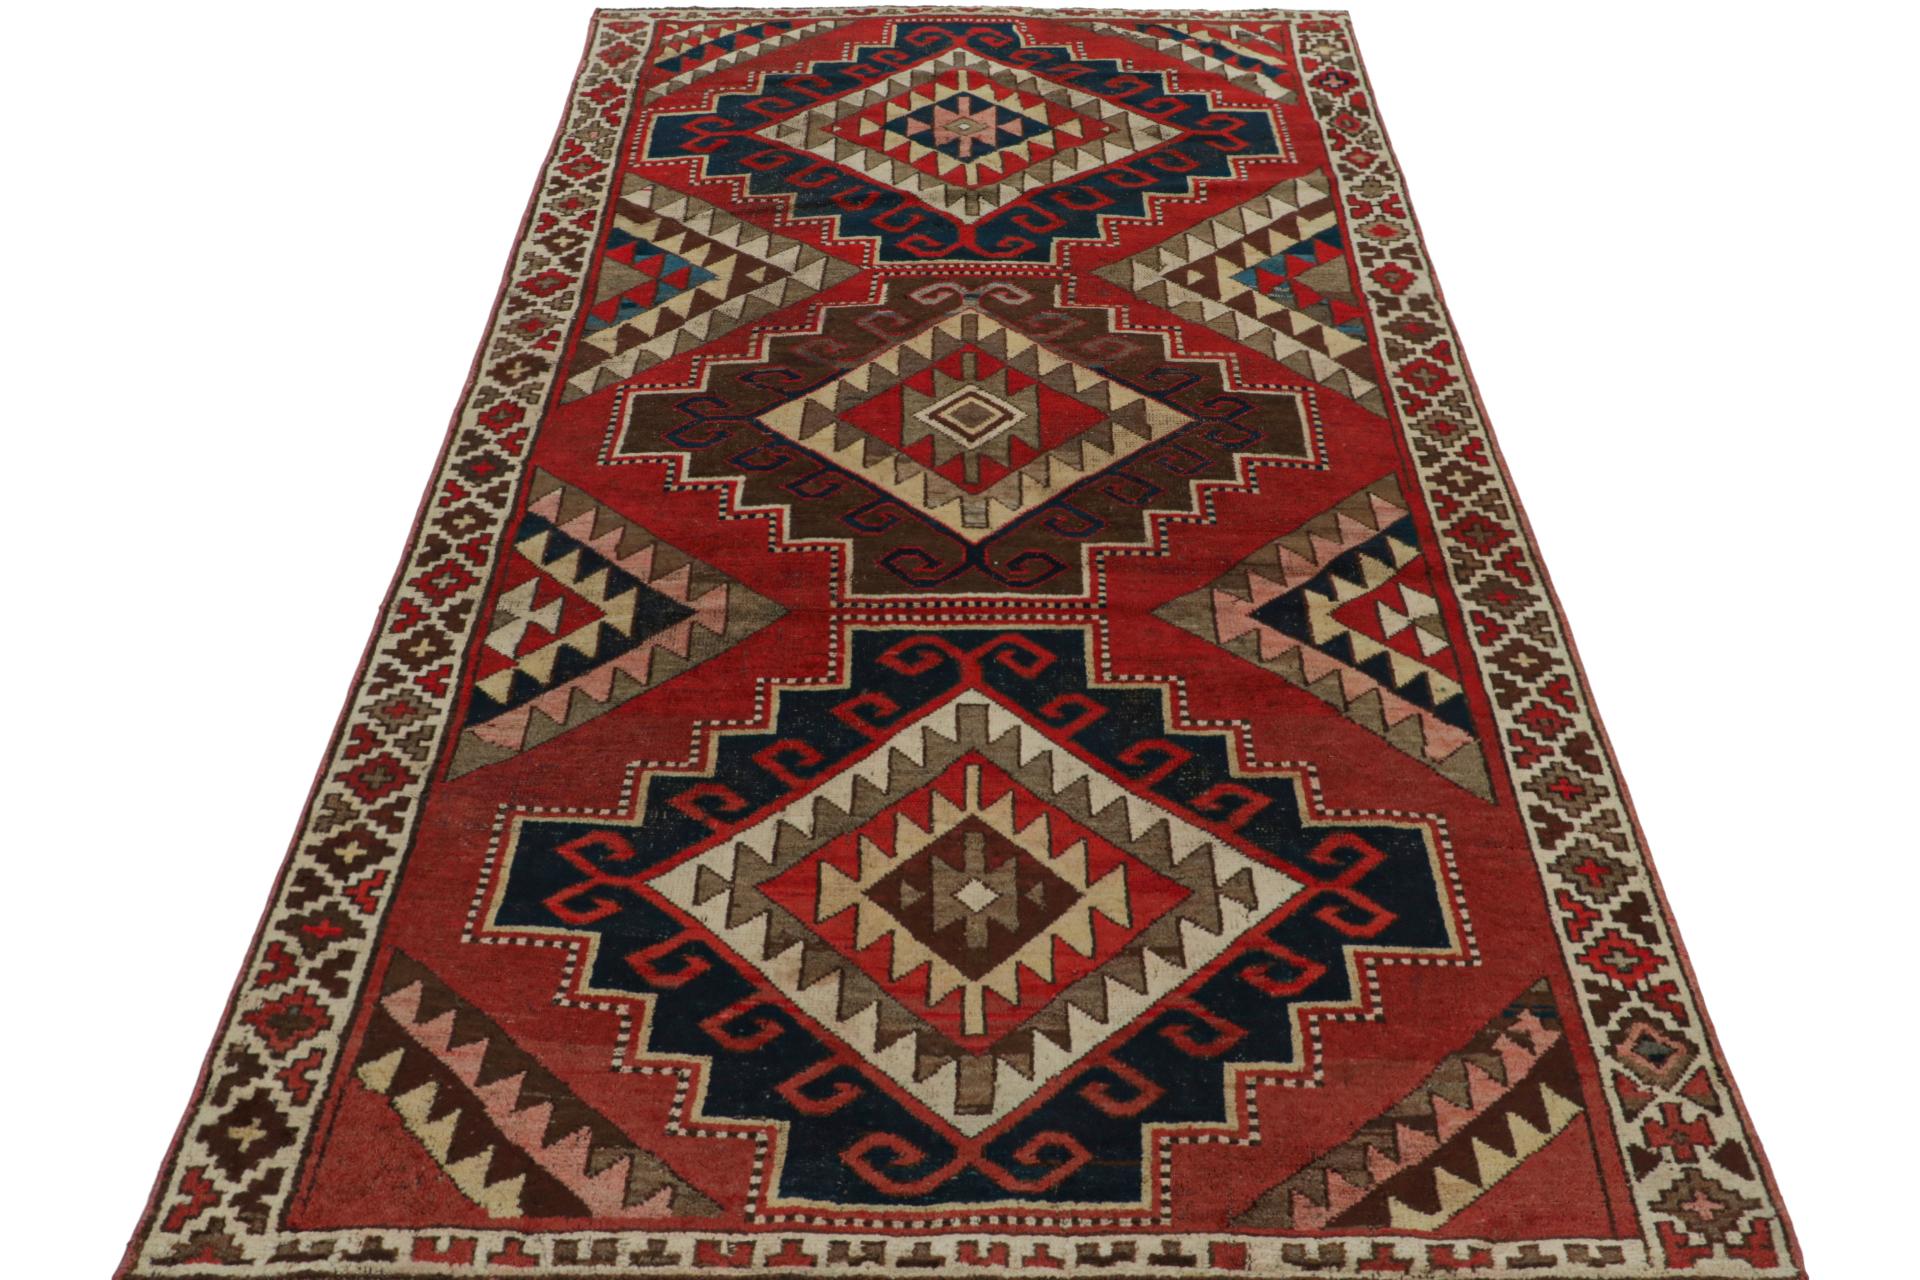 Tribal Vintage Turkish Rug, with All-Over Geometric Patterns, from Rug & Kilim For Sale